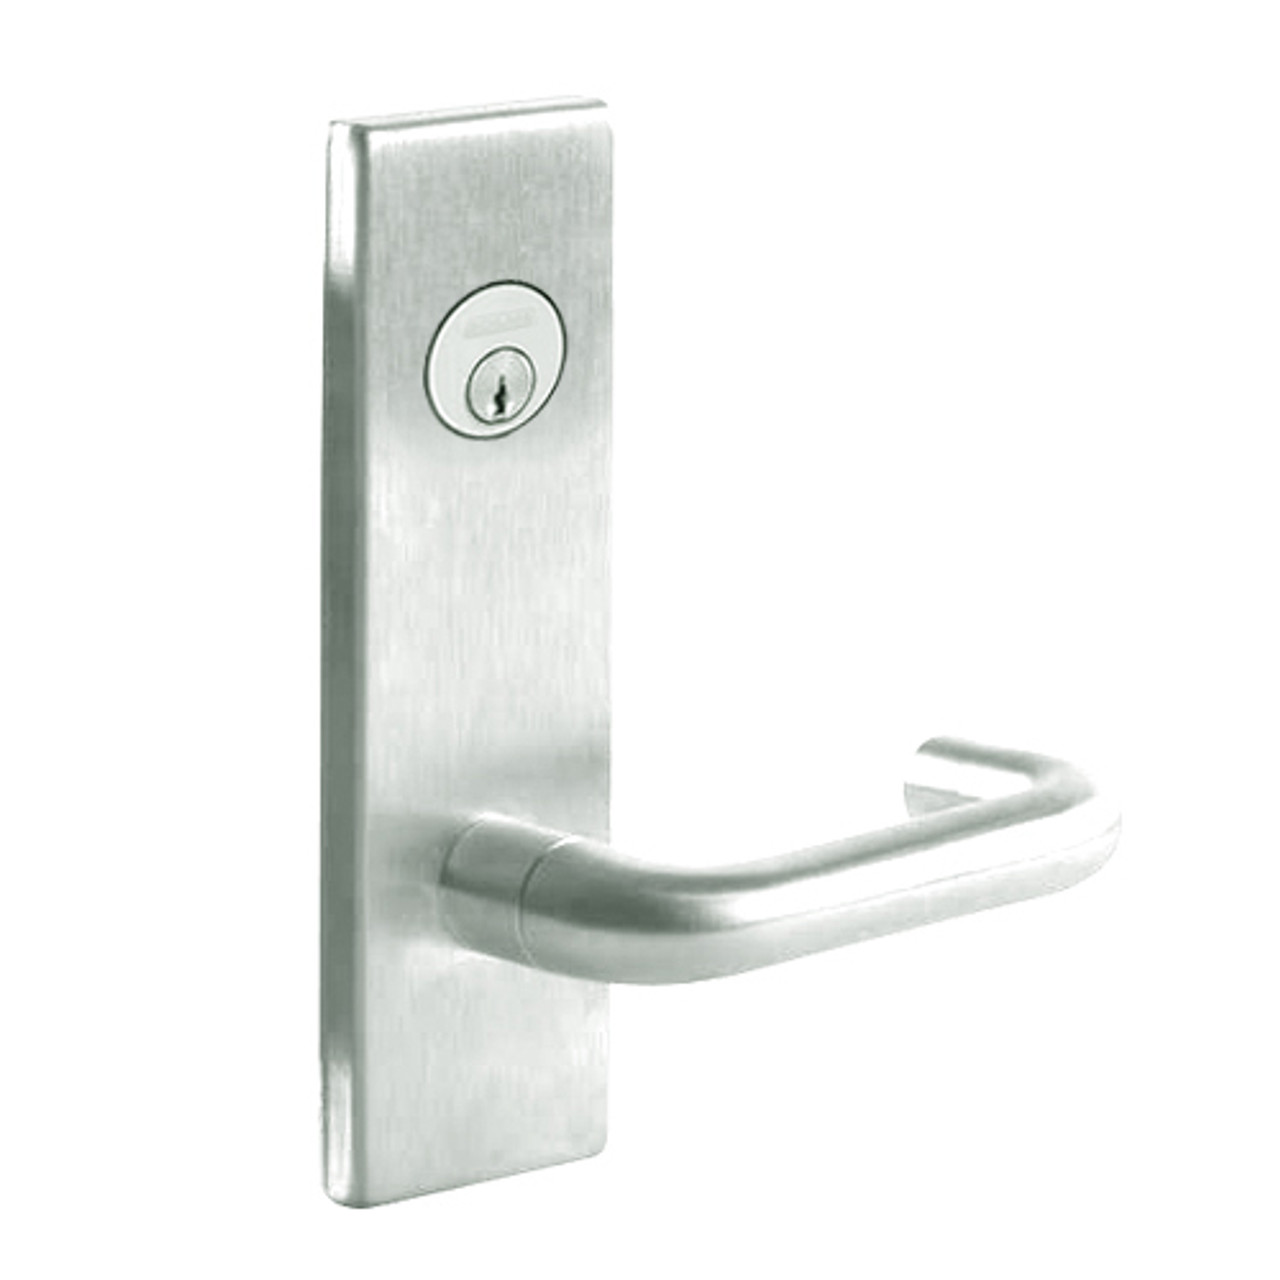 L9026P-03N-619 Schlage L Series Exit Lock with Cylinder Commercial Mortise Lock with 03 Cast Lever Design in Satin Nickel